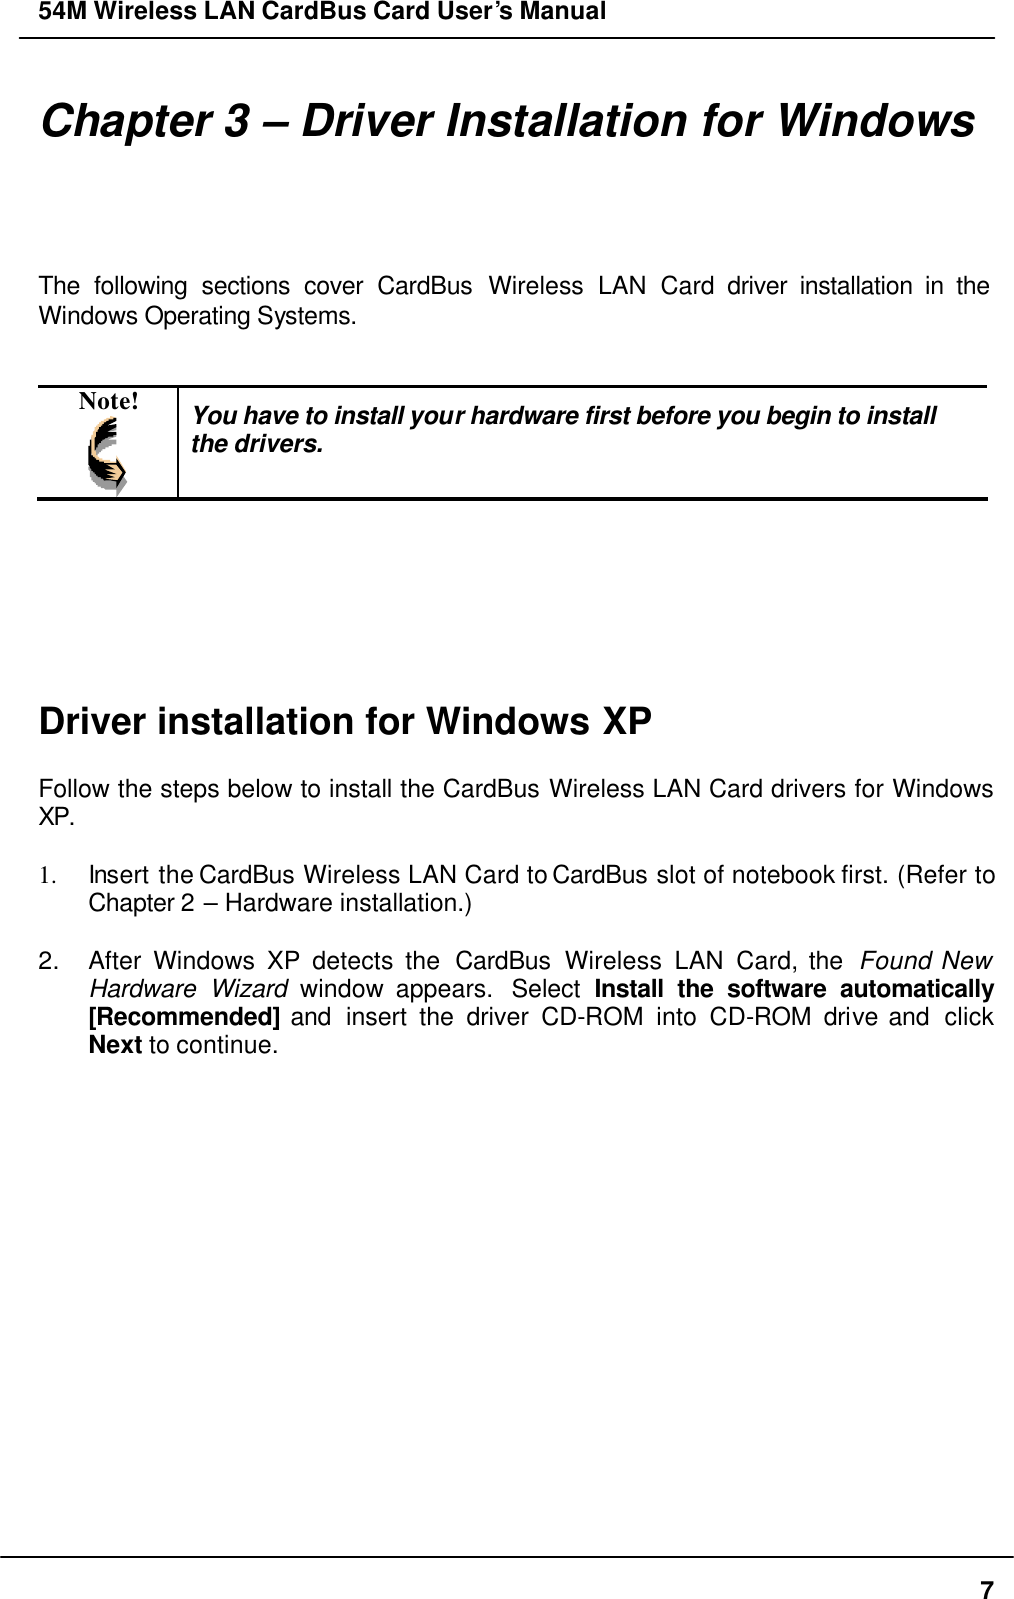 54M Wireless LAN CardBus Card User’s Manual  7 Chapter 3 – Driver Installation for Windows The following sections cover CardBus Wireless LAN Card driver installation in the Windows Operating Systems.   Note!  You have to install your hardware first before you begin to install the drivers.        Driver installation for Windows XP  Follow the steps below to install the CardBus Wireless LAN Card drivers for Windows XP.  1. Insert the CardBus Wireless LAN Card to CardBus slot of notebook first. (Refer to Chapter 2 – Hardware installation.)  2. After Windows XP detects the CardBus Wireless LAN Card, the  Found New Hardware Wizard window appears.  Select  Install the software automatically [Recommended] and  insert the driver CD-ROM into CD-ROM drive and  click Next to continue.  